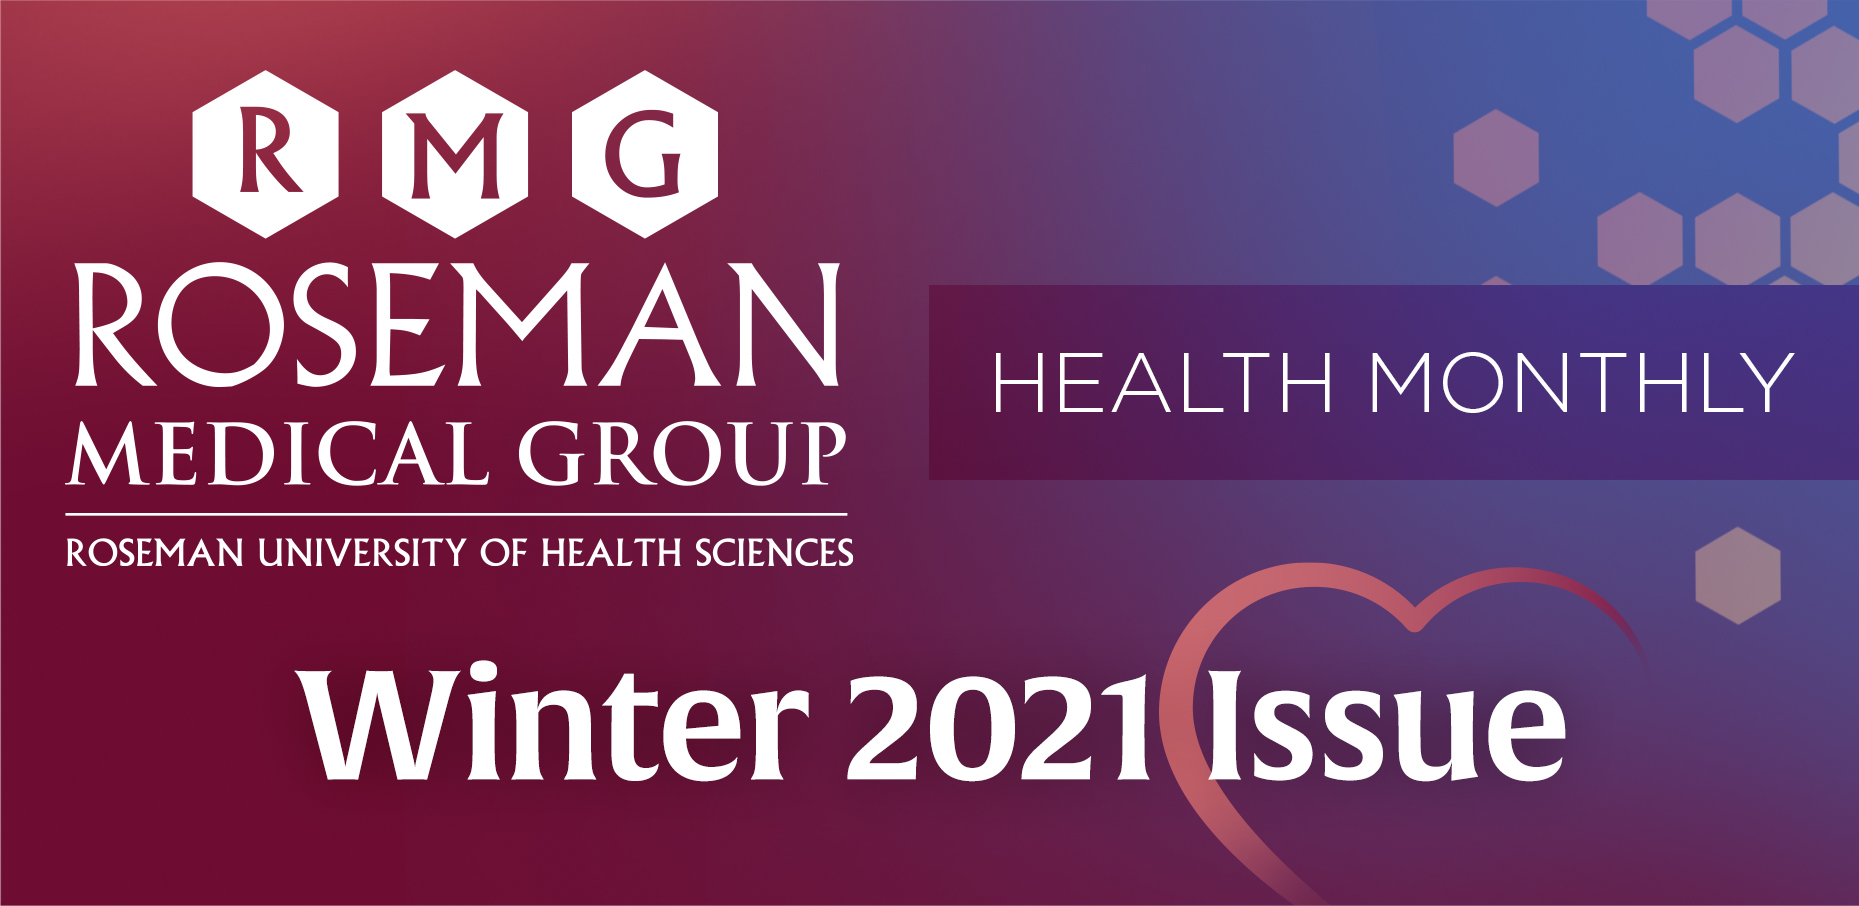 RMG Health Monthly: Winter 2021 Issue